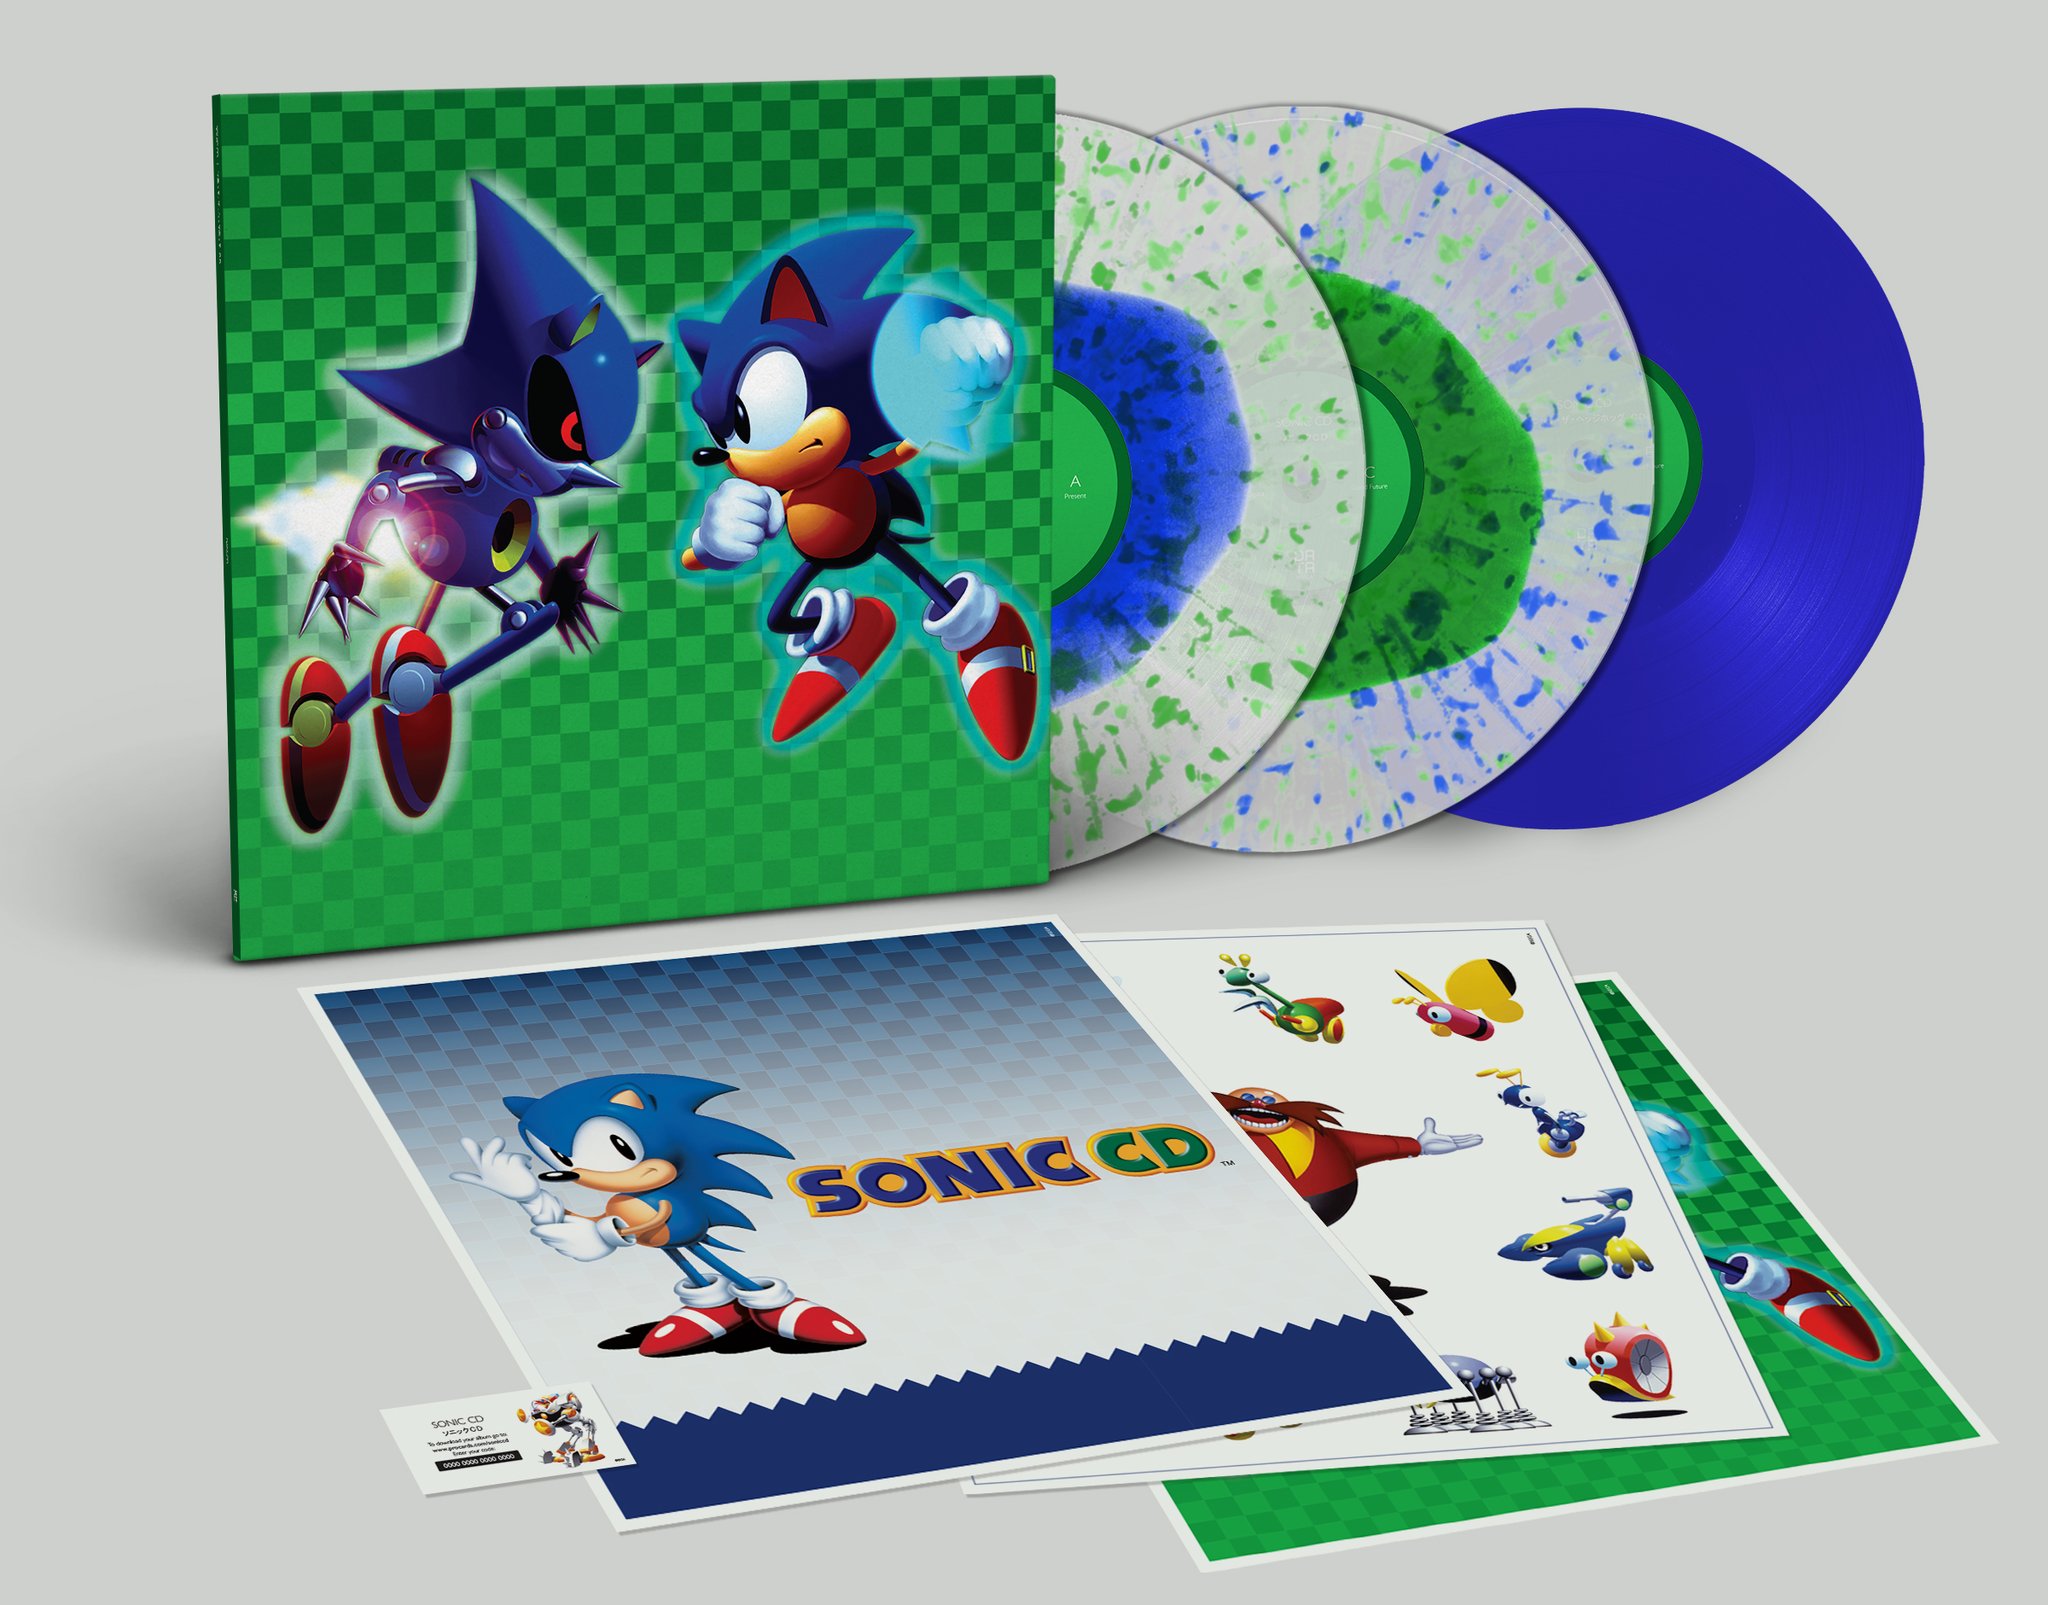 UPDATE] SEGA delisting Sonic 1, 2, 3 & Knuckles and CD from digital  storefronts on May 20th » SEGAbits - #1 Source for SEGA News